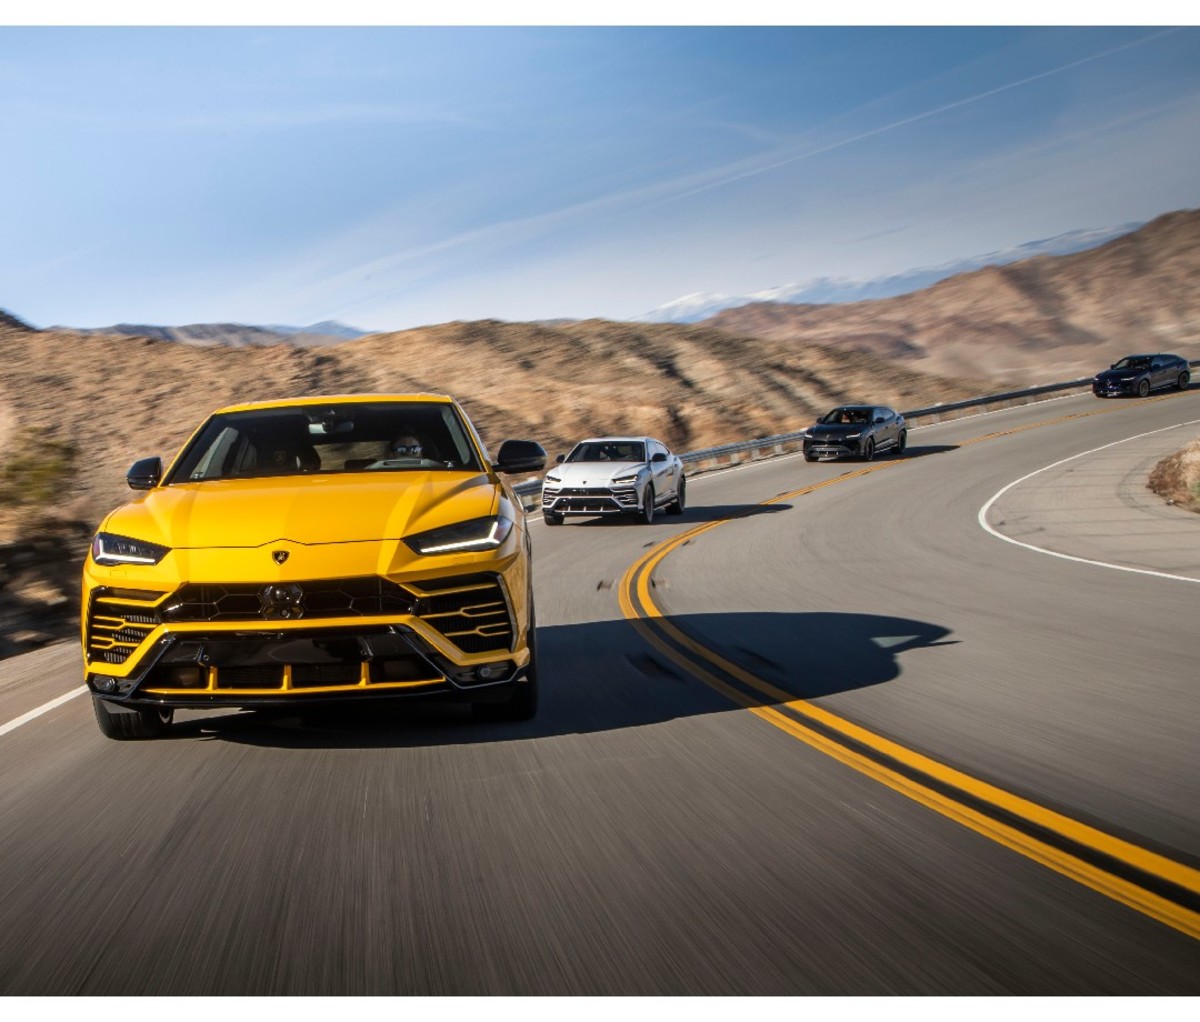 Front of yellow 2021 Lamborghini Urus driving on a curved desert road with three Lambo Urus's behind